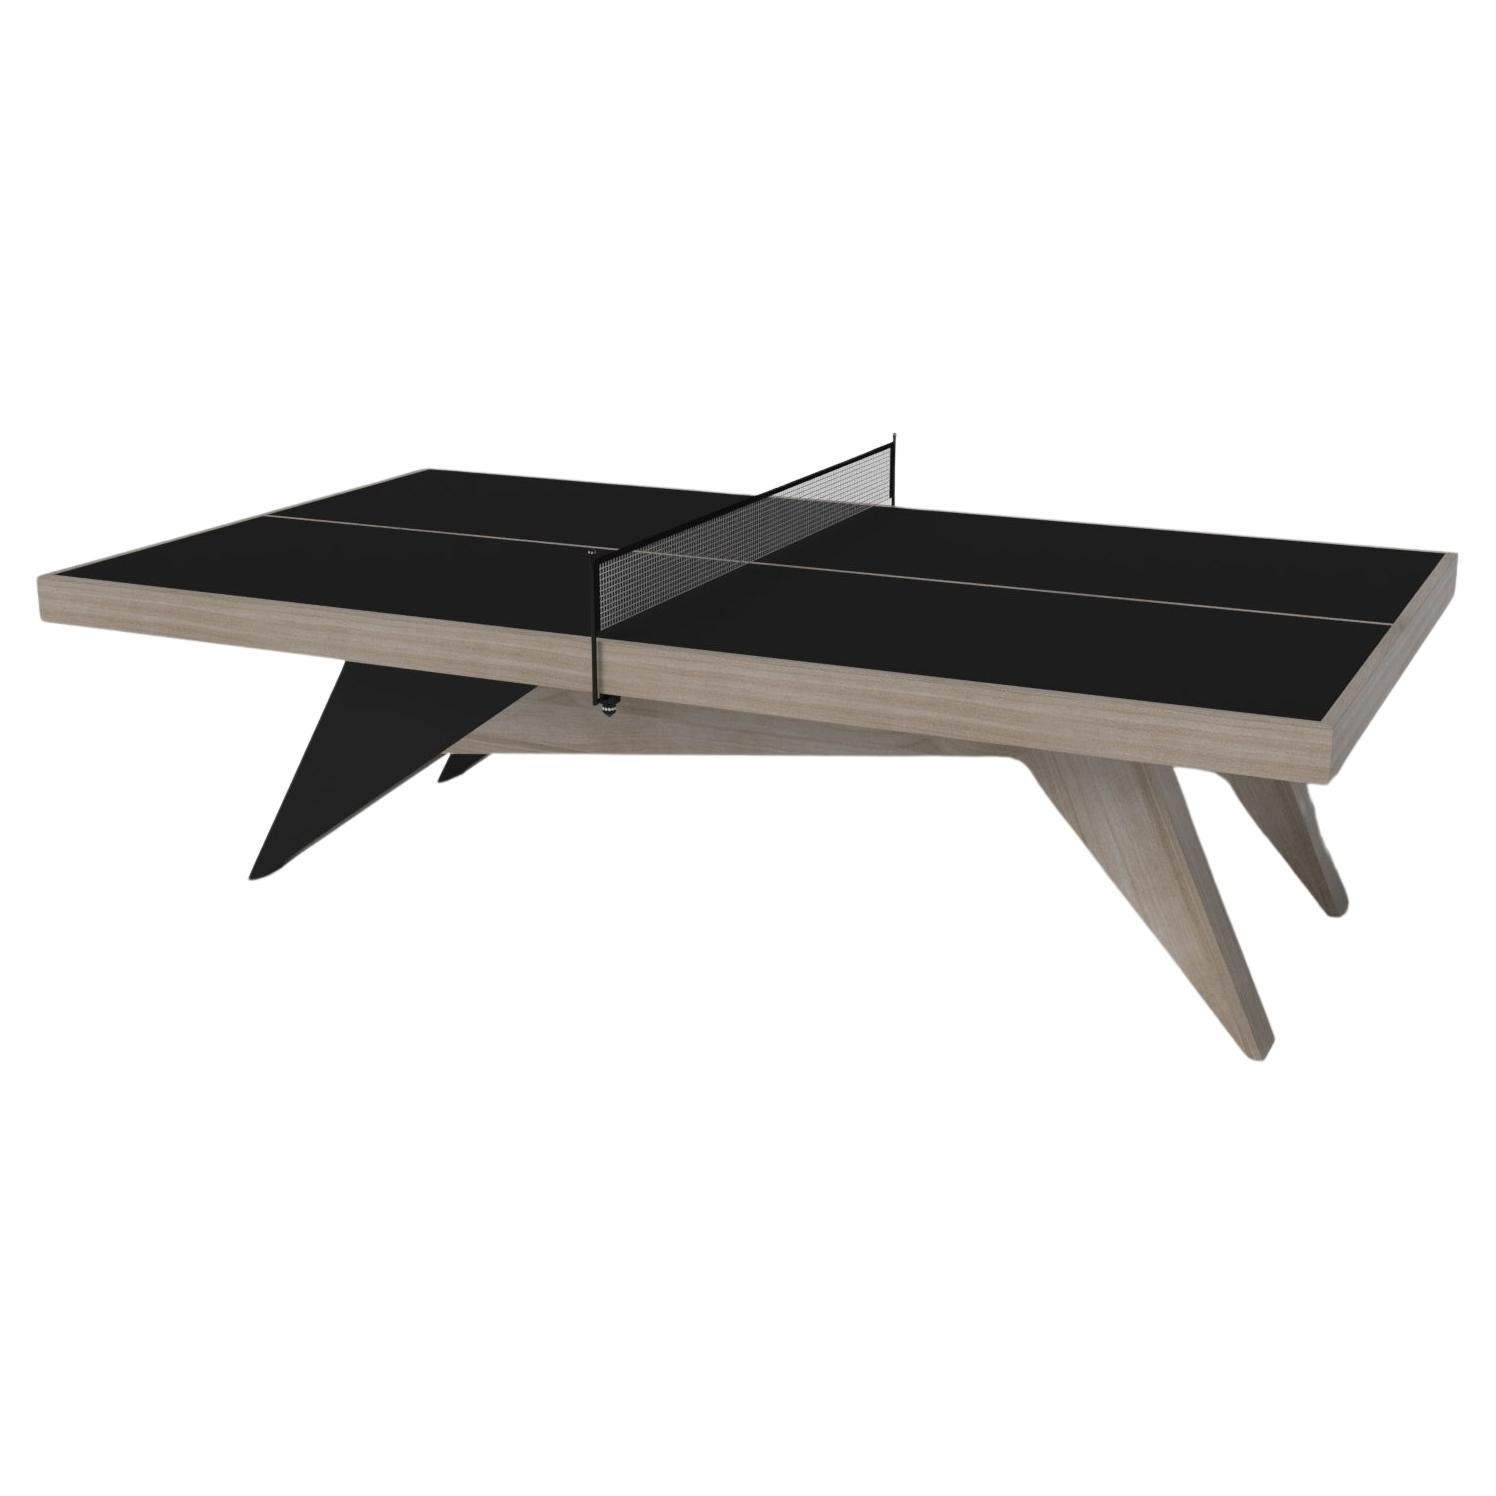 Elevate Customs Mantis Tennis Table / Solid White Oak Wood in 9' - Made in USA